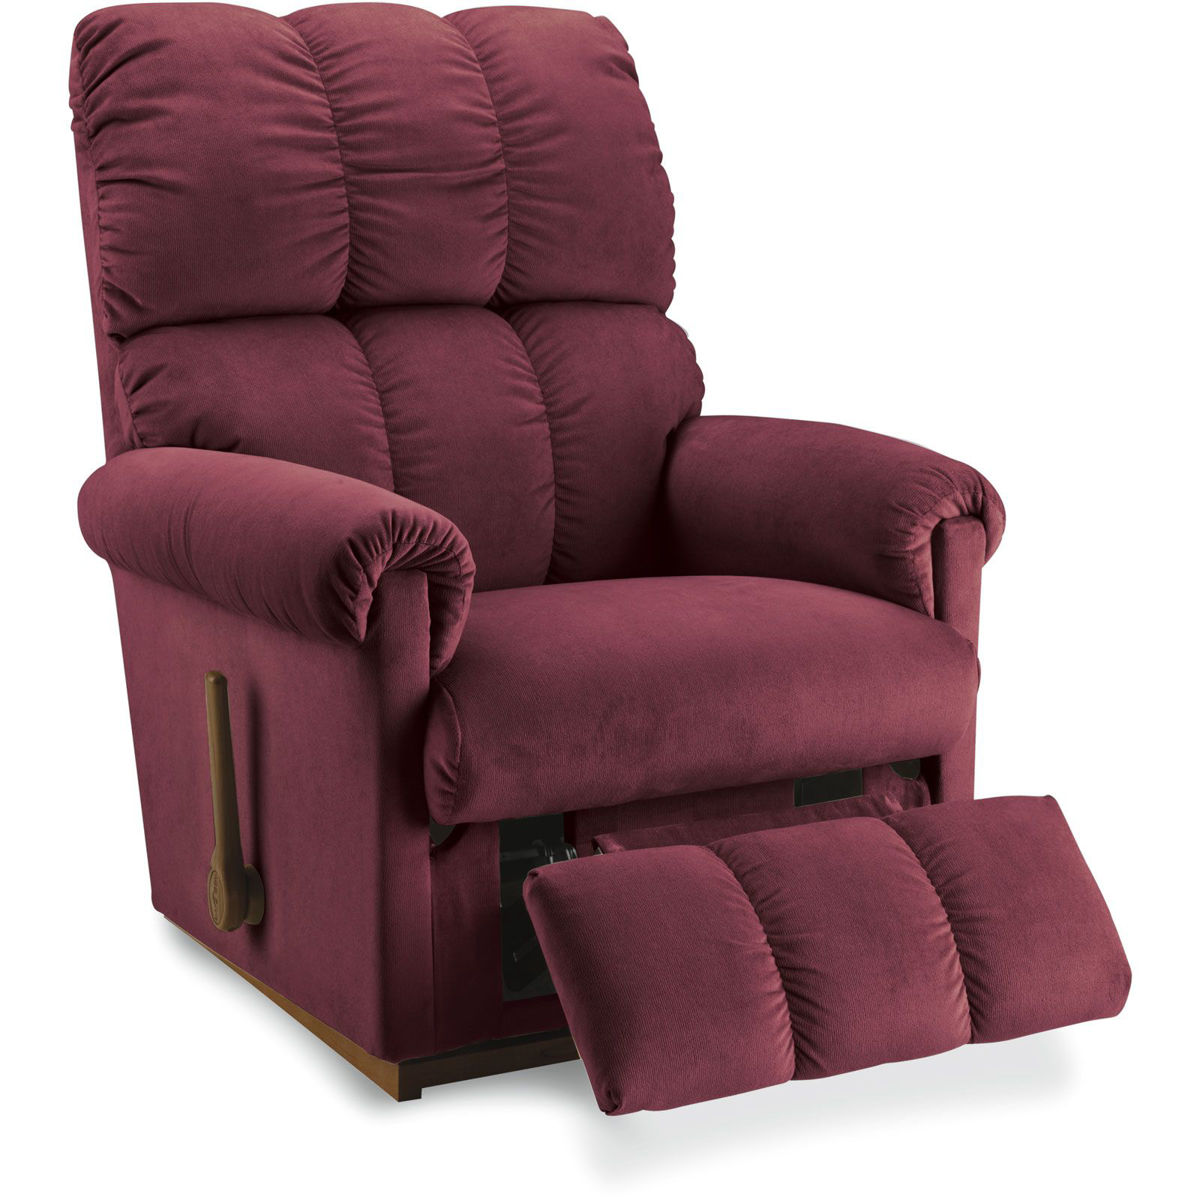 Picture of Vail Burgundy Rocker Recliner